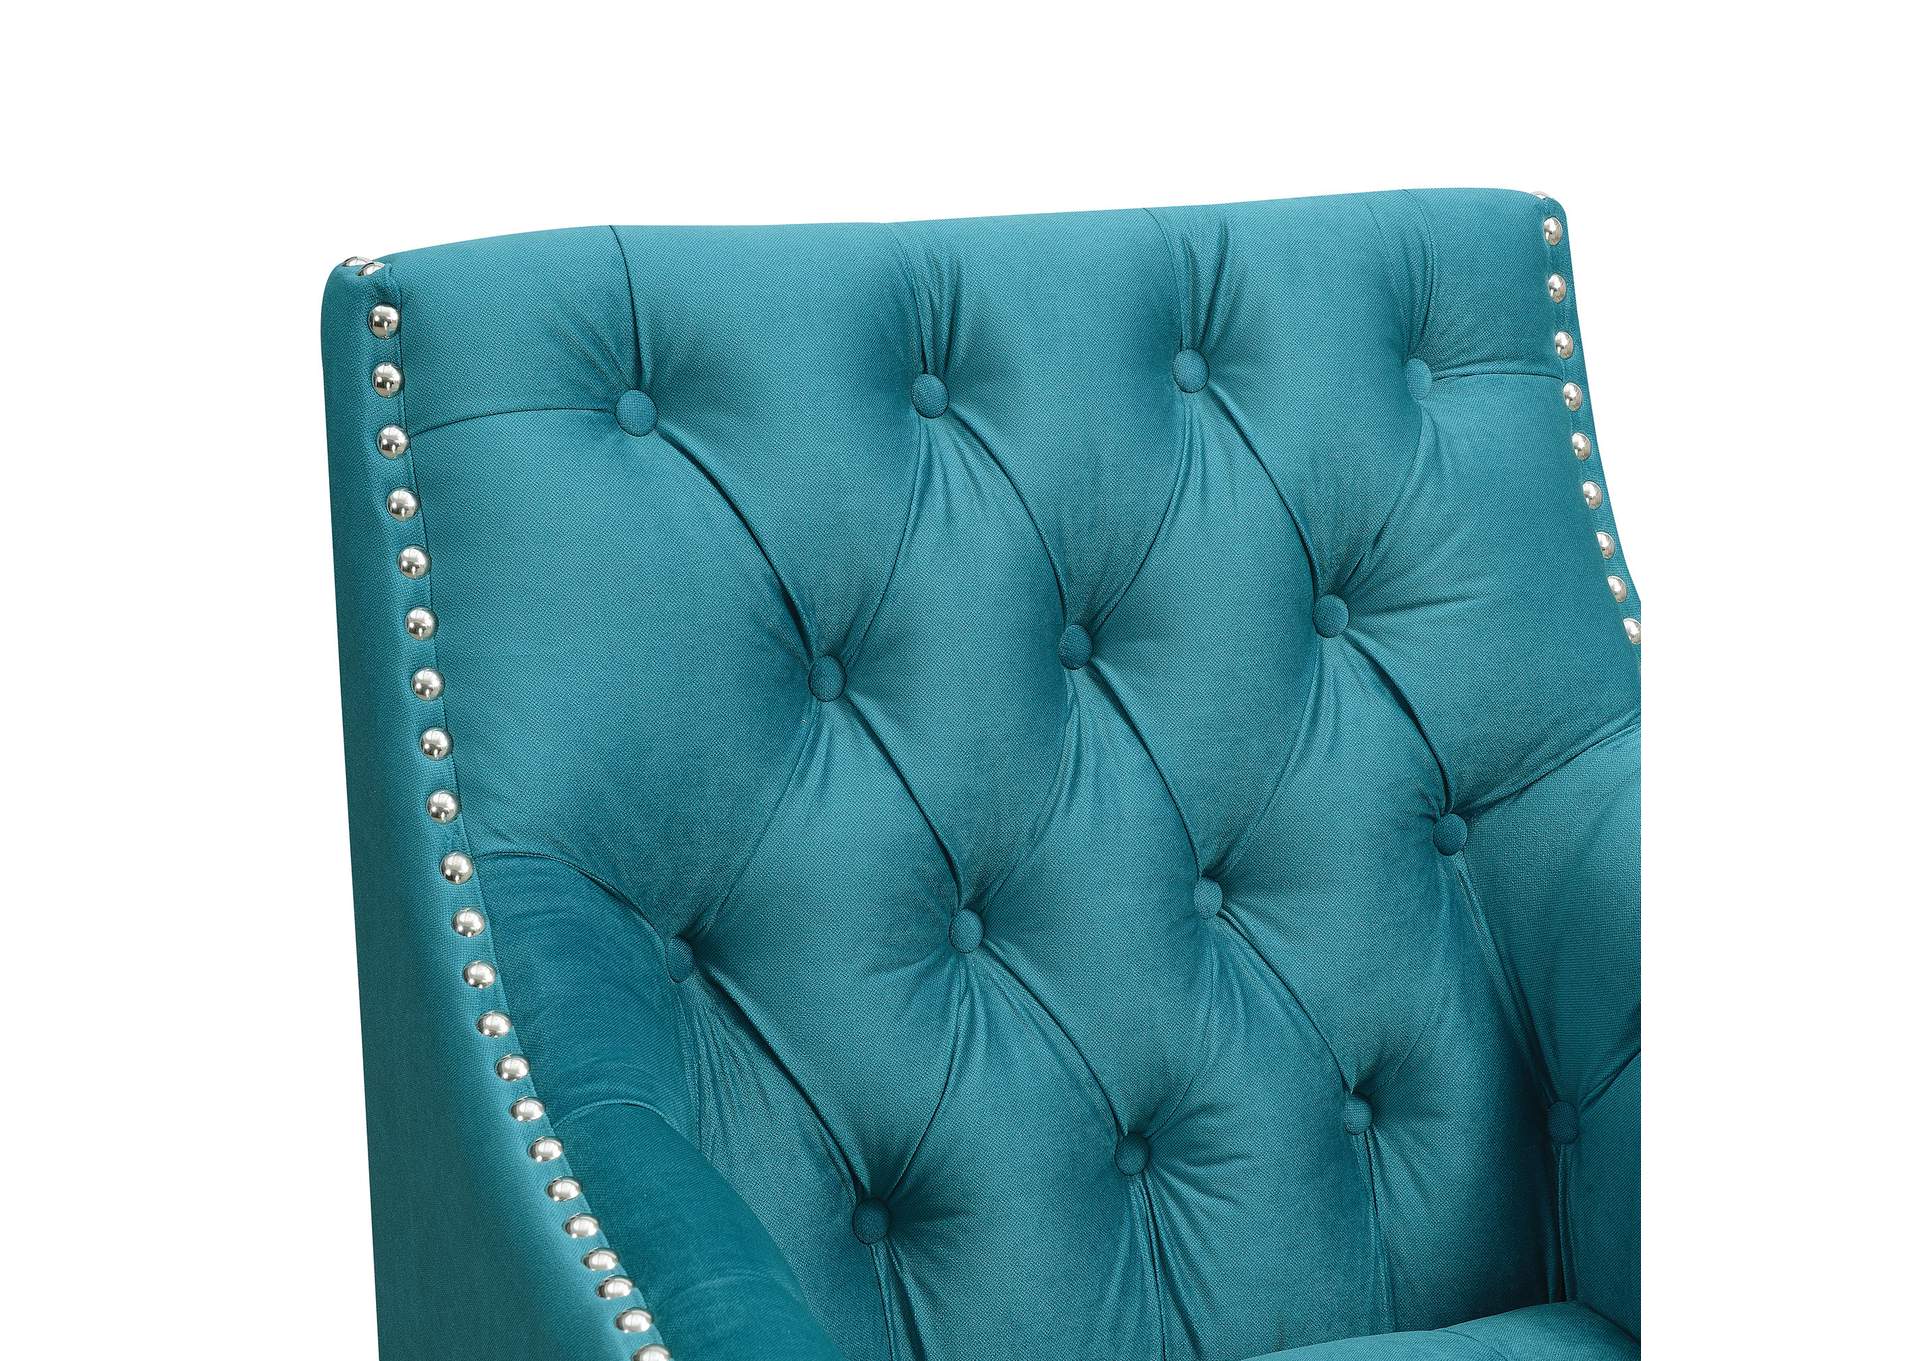 Norway Accent Chair Ottoman Teal,Elements